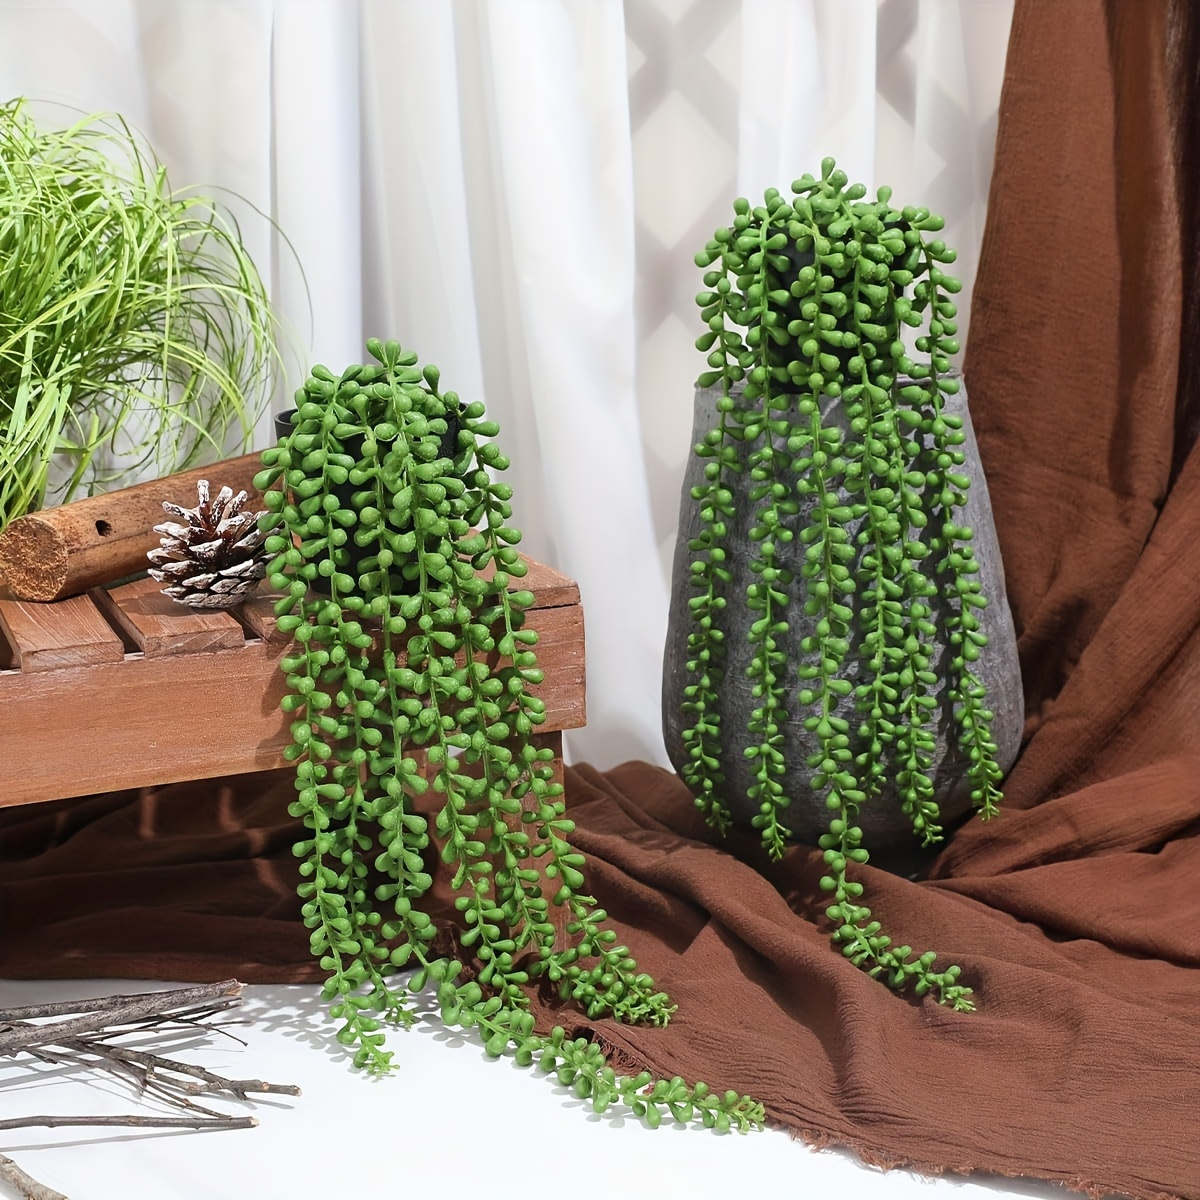 

1pc Artificial String Of Pearls Hanging Succulent Plant - Plastic Greenery Decor For Wall, Wedding, Party, Home, Garden, Indoor/outdoor Aesthetic Room Decoration